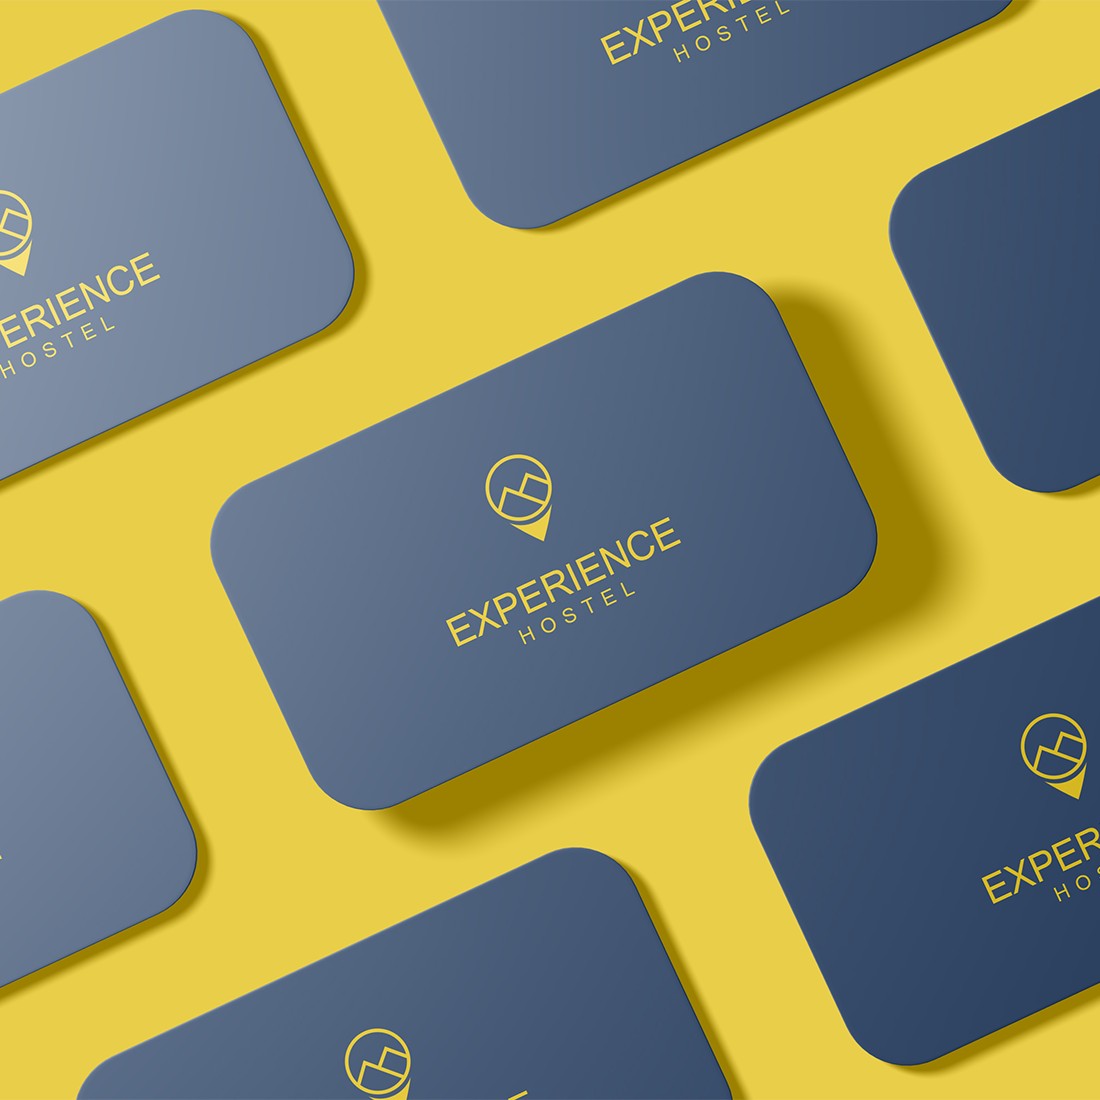 Blue matte business cards with gold hot air balloons logo.